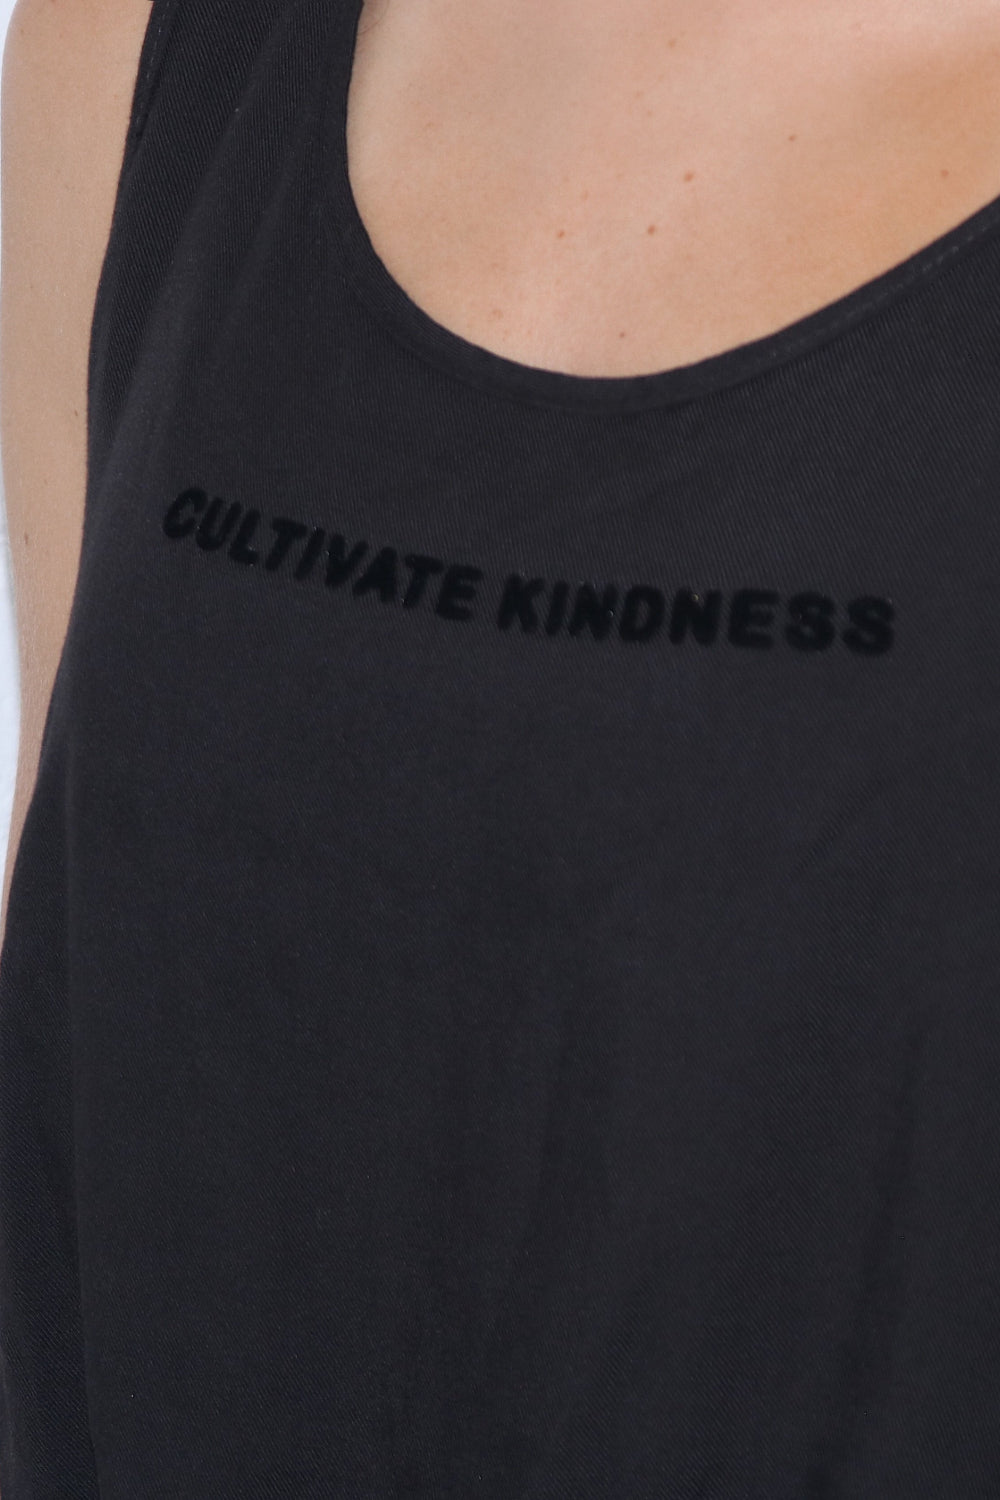 Cultivate Kindness Tank